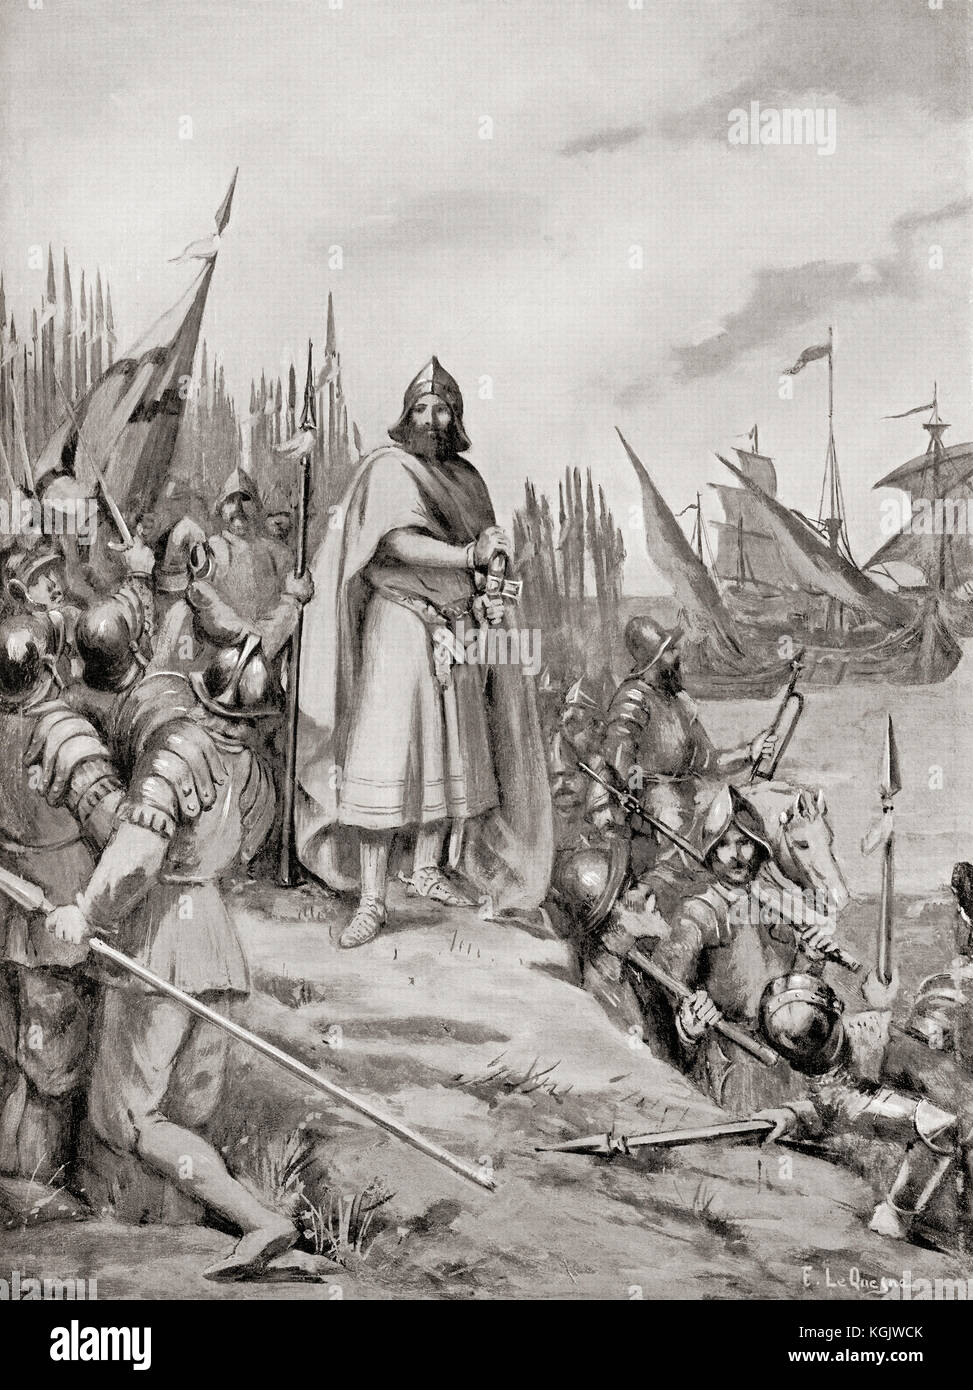 King Erik IX of Sweden lands on the coast of Finland, 1157.  Eric IX of Sweden, d. 1160, aka Eric the Lawgiver, Erik the Saint, Eric the Holy.  Swedish king c. 1156-60.  From Hutchinson's History of the Nations, published 1915. Stock Photo